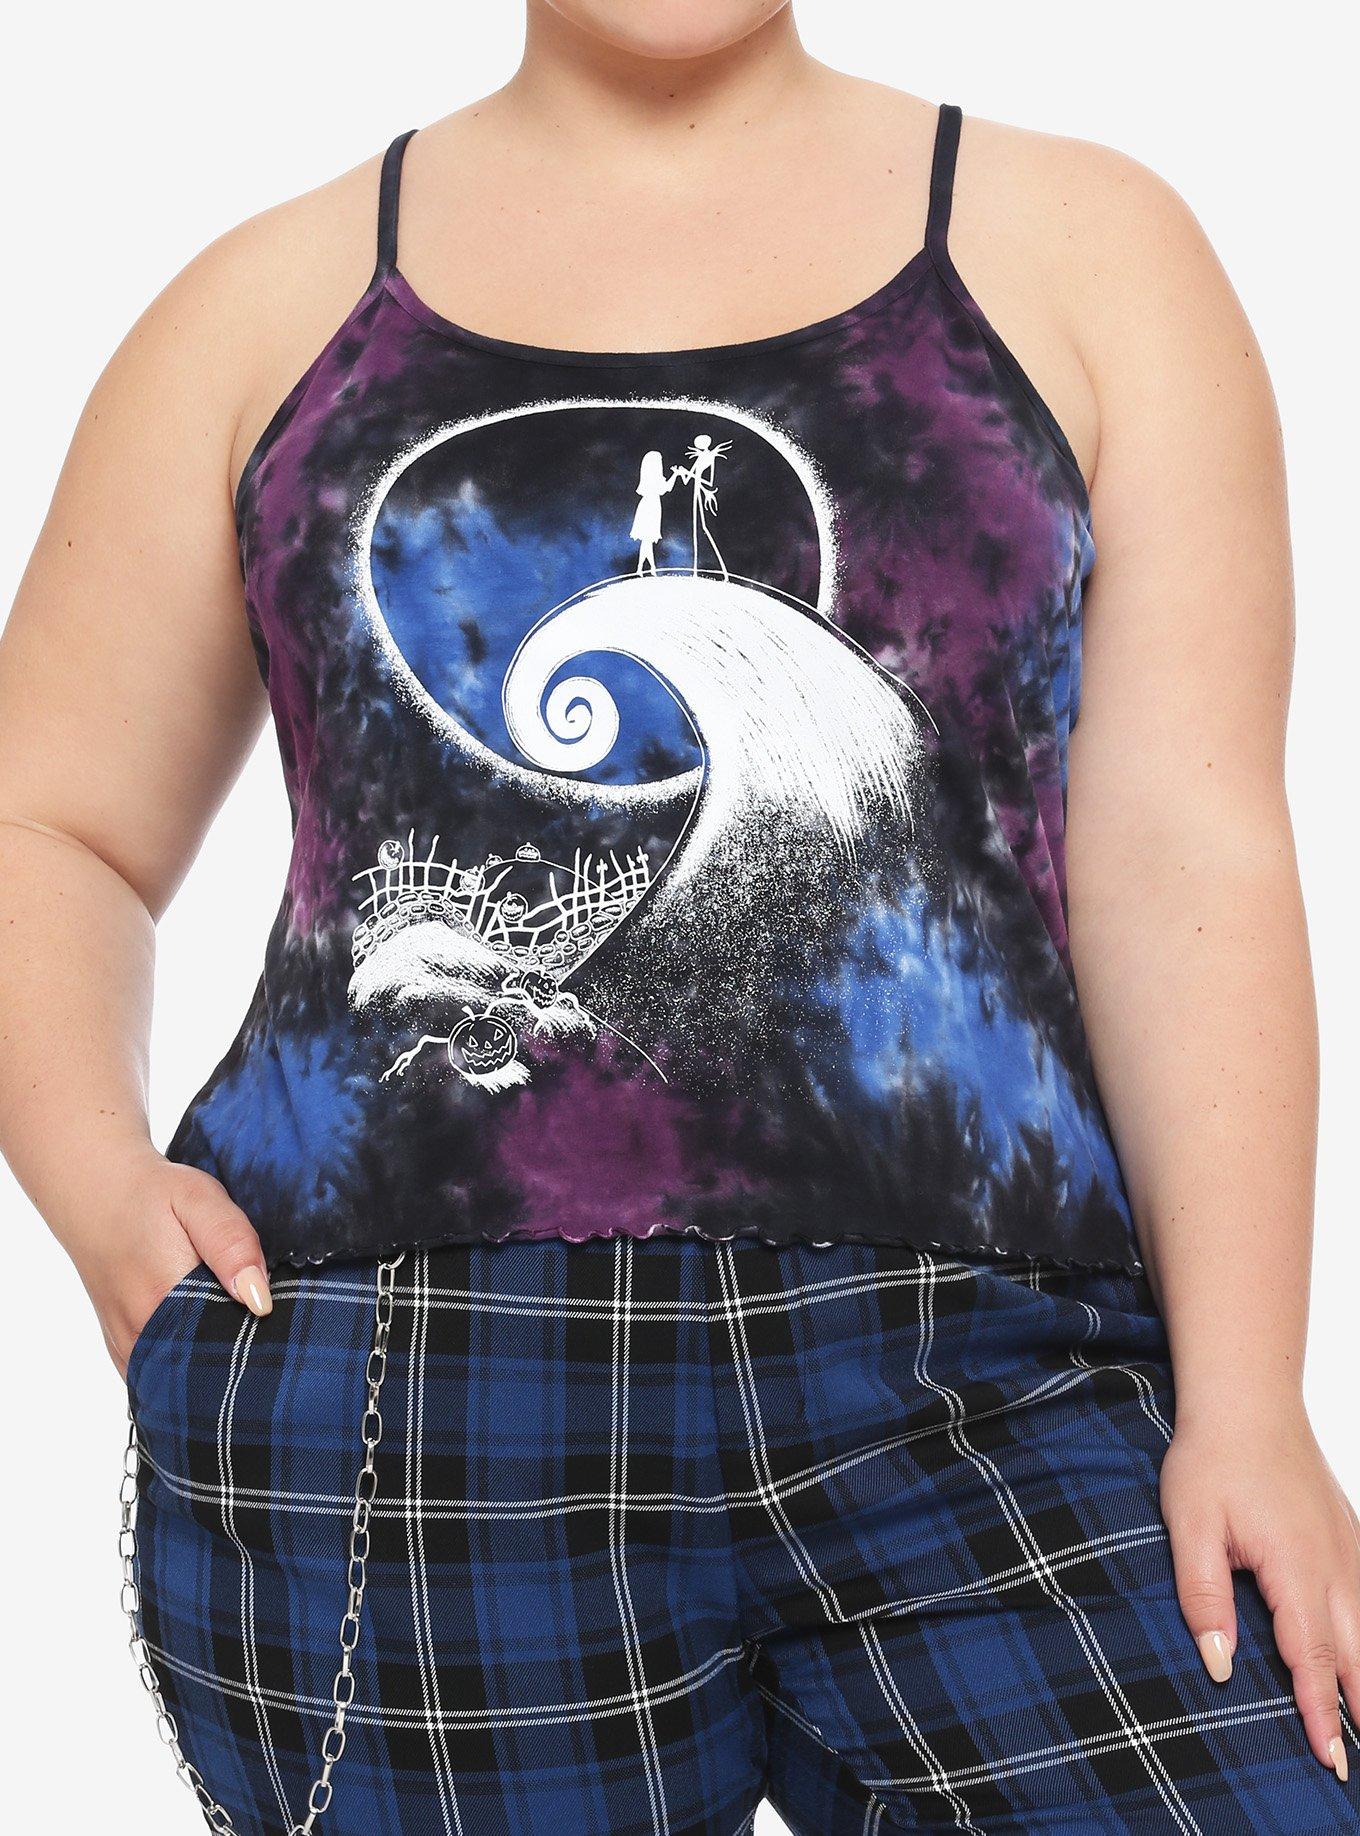 The Nightmare Before Christmas Spiral Hill Tie-Dye Girls Strappy Tank Top Plus Size, MULTI, hi-res